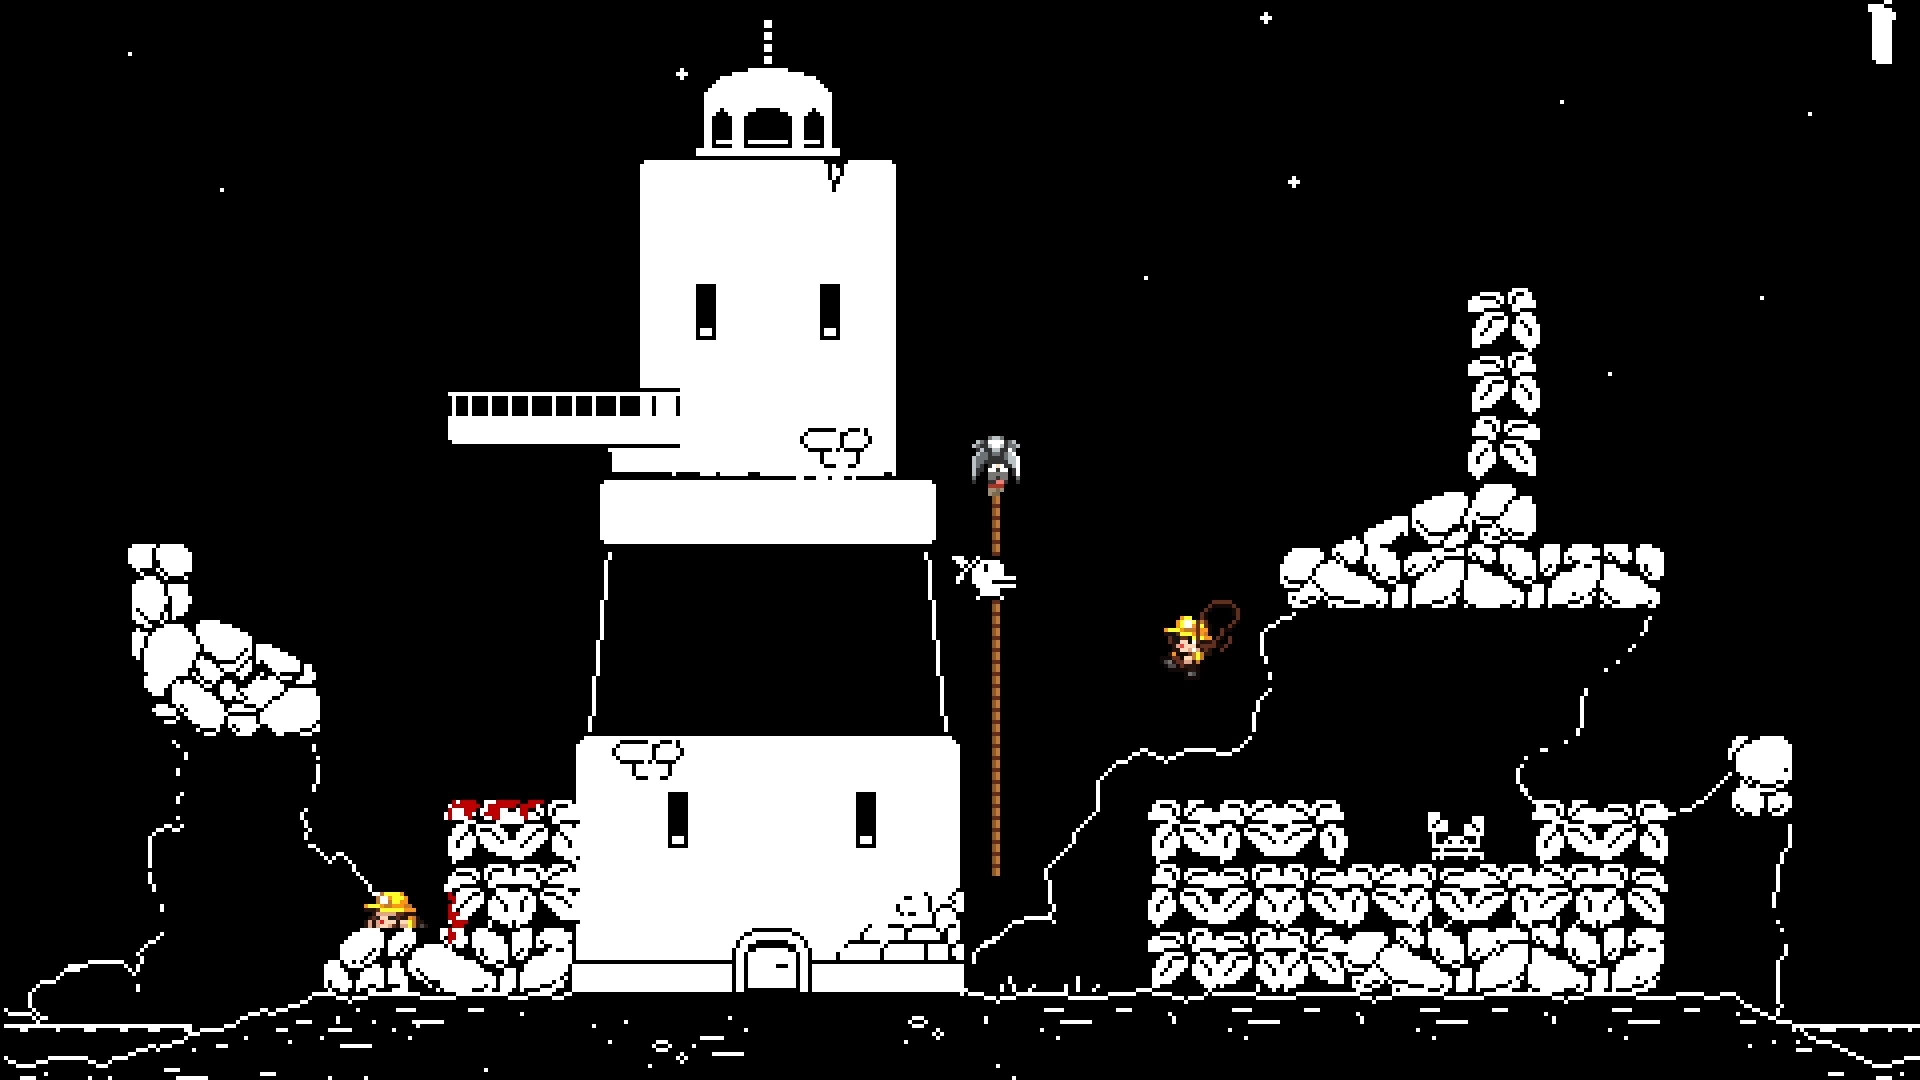  Samurai Gunn 2 is going to fight Minit and Spelunky on Steam this summer 